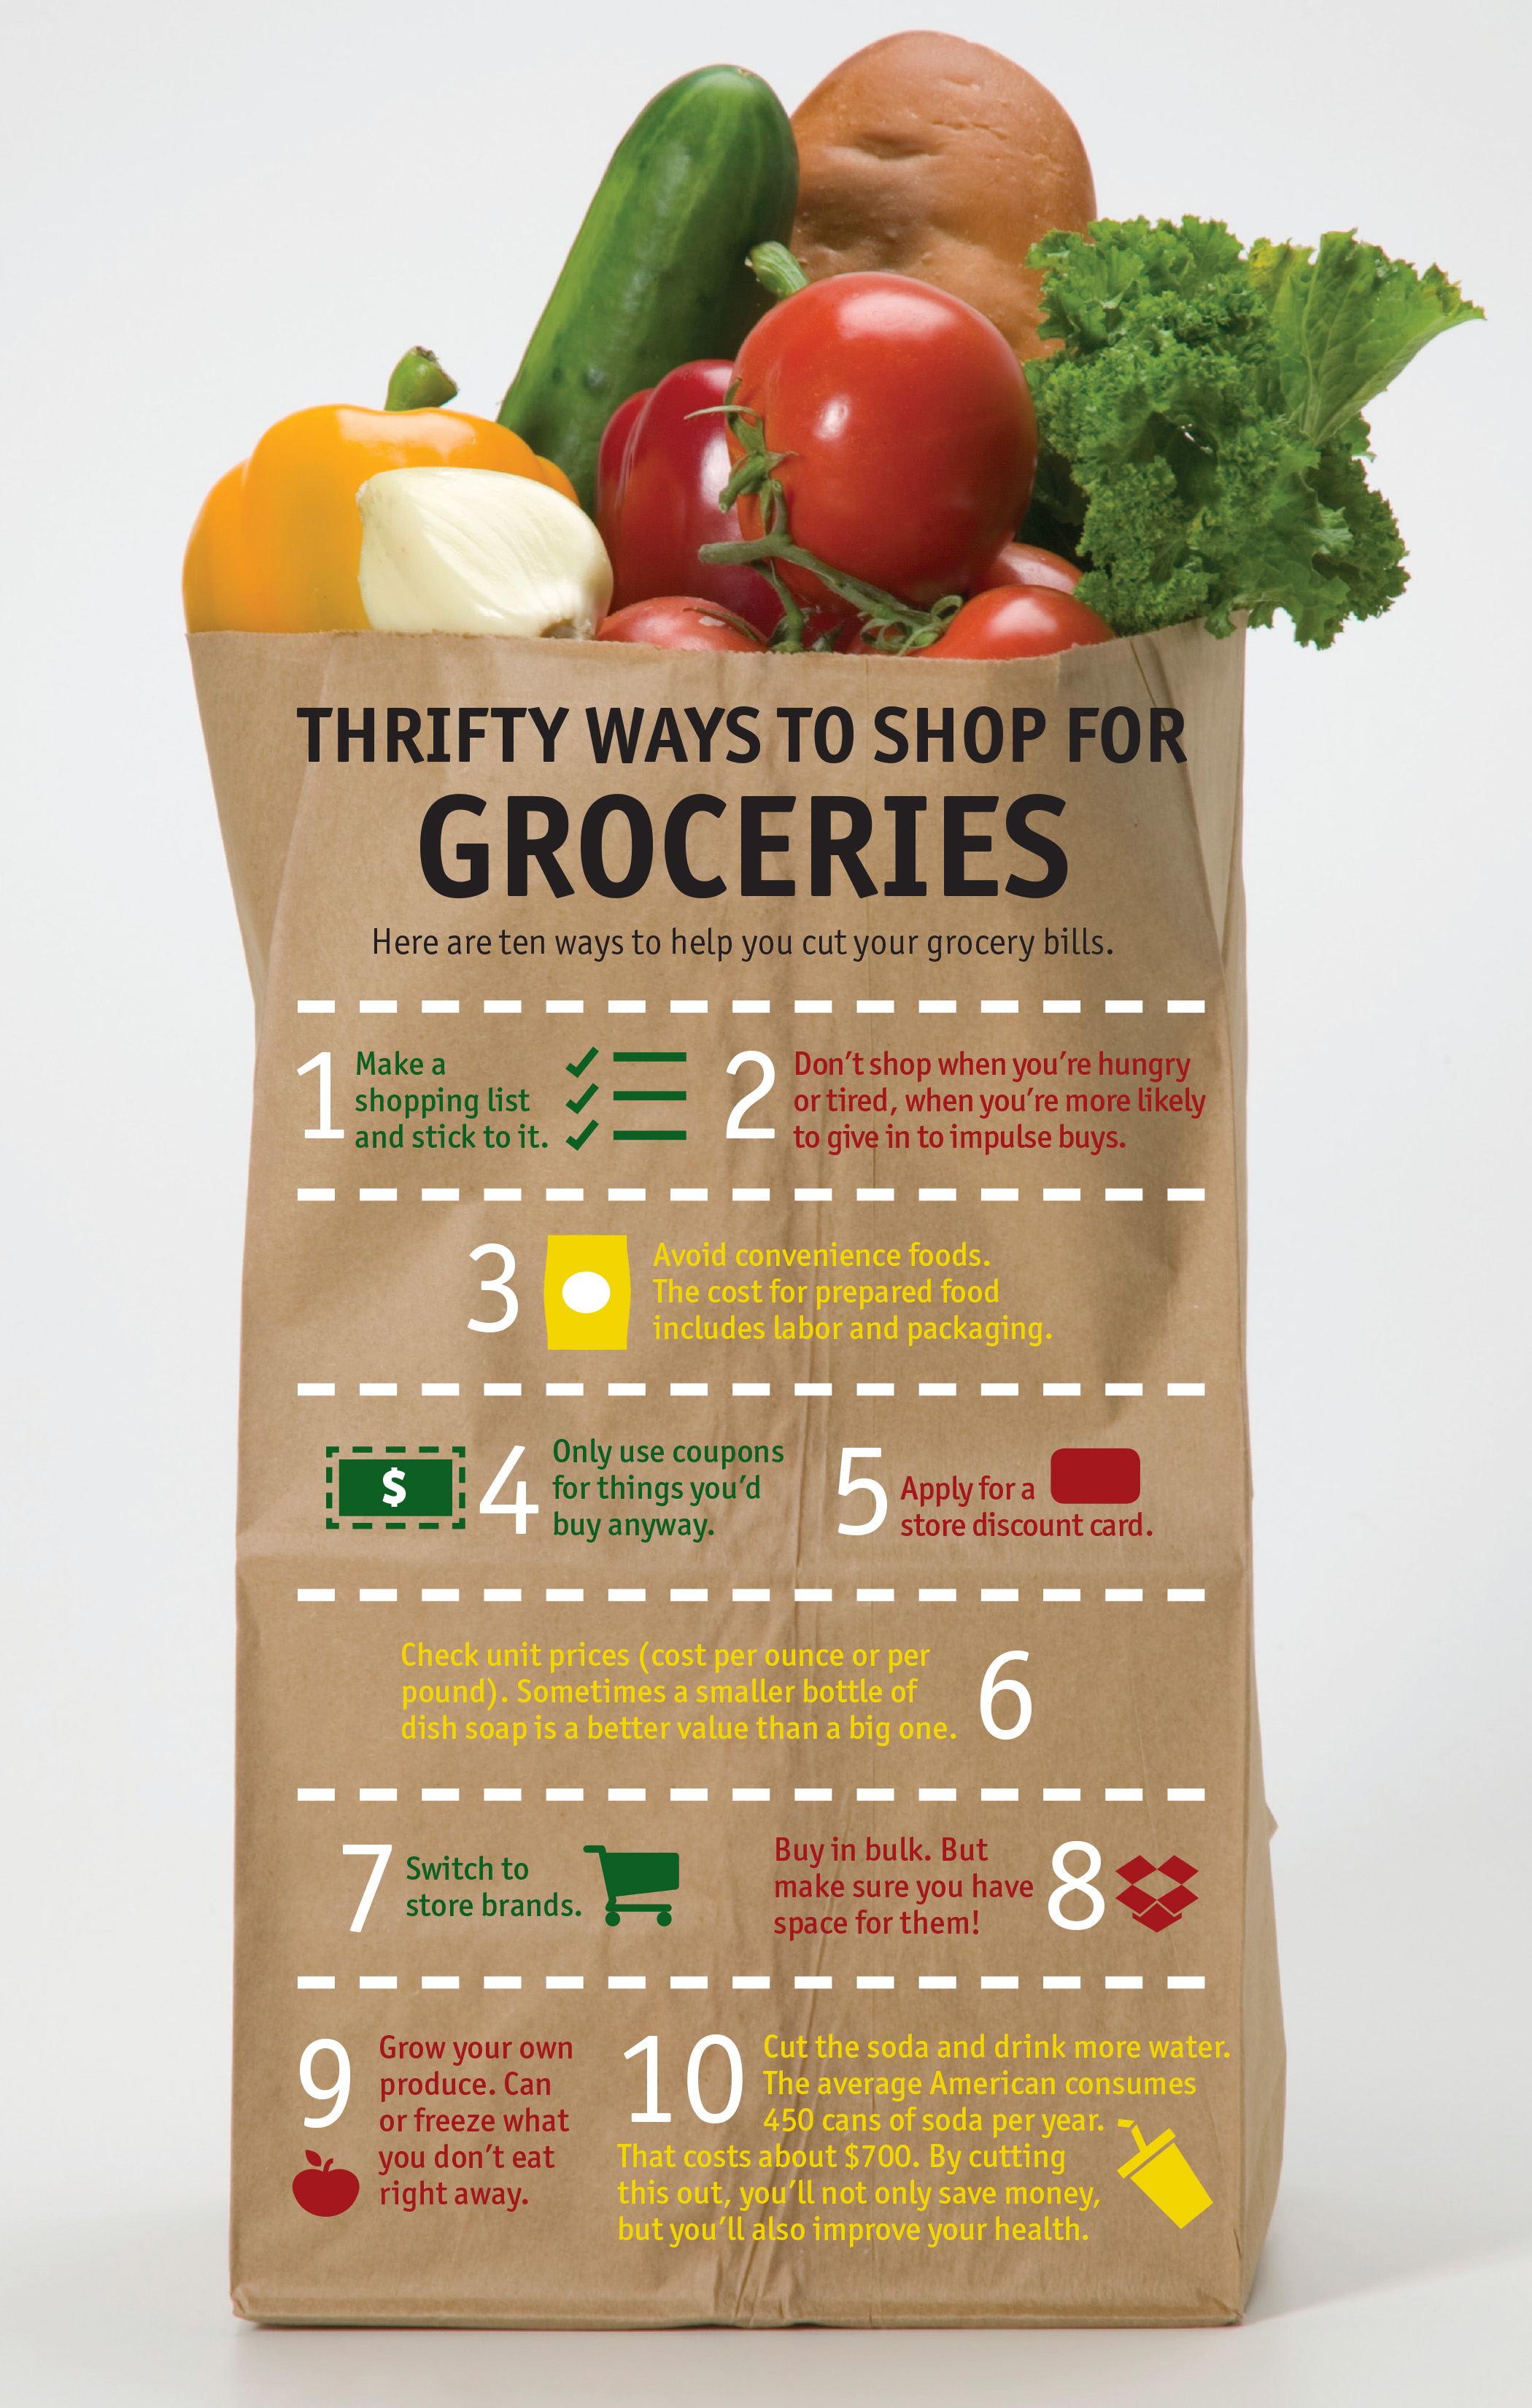 Thrifty Ways to Shop for Groceries